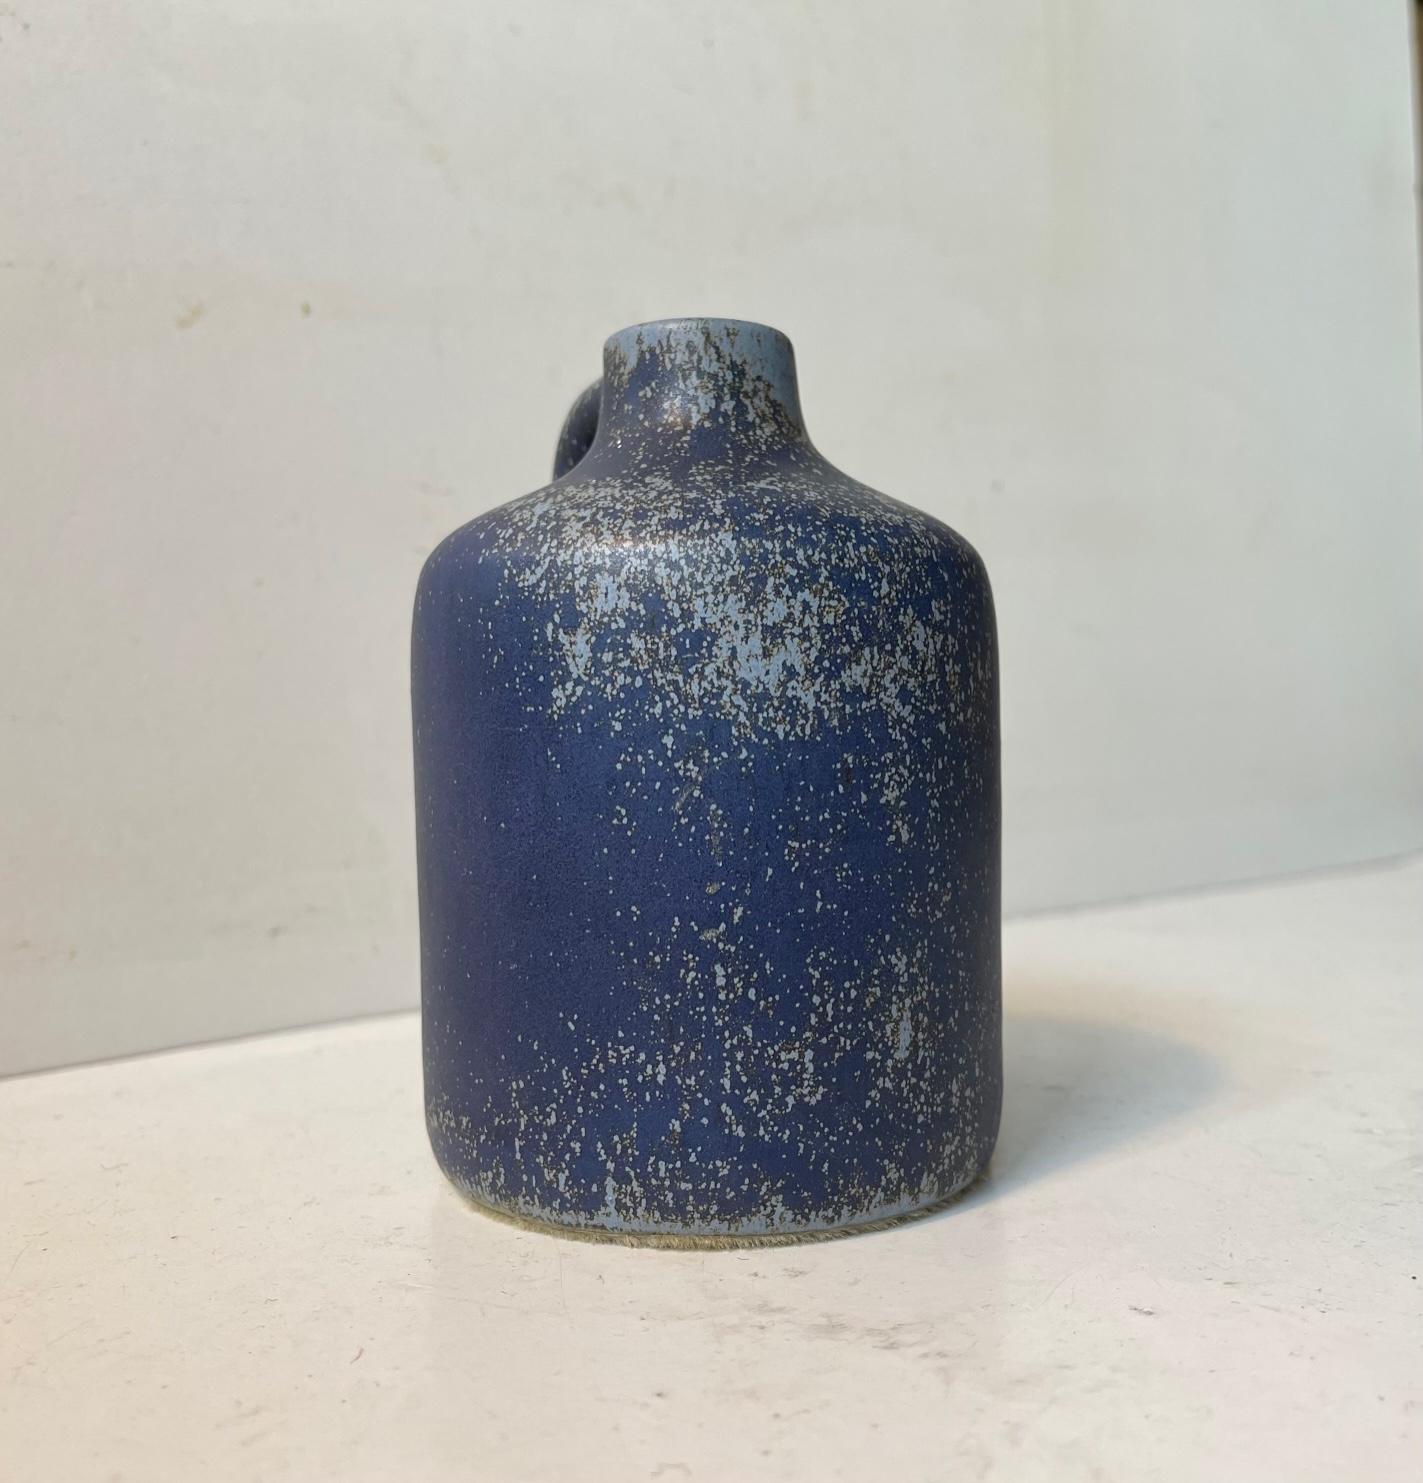 Small unidentified Swedish ceramic vase with delicate speckled blue glaze. Very similar to pieces by Gunnar Nylund, Carl H. Stahlhane and Rolf Palm. We have not removed the Suede cover to its bottom so who know whos signature will be revealed.